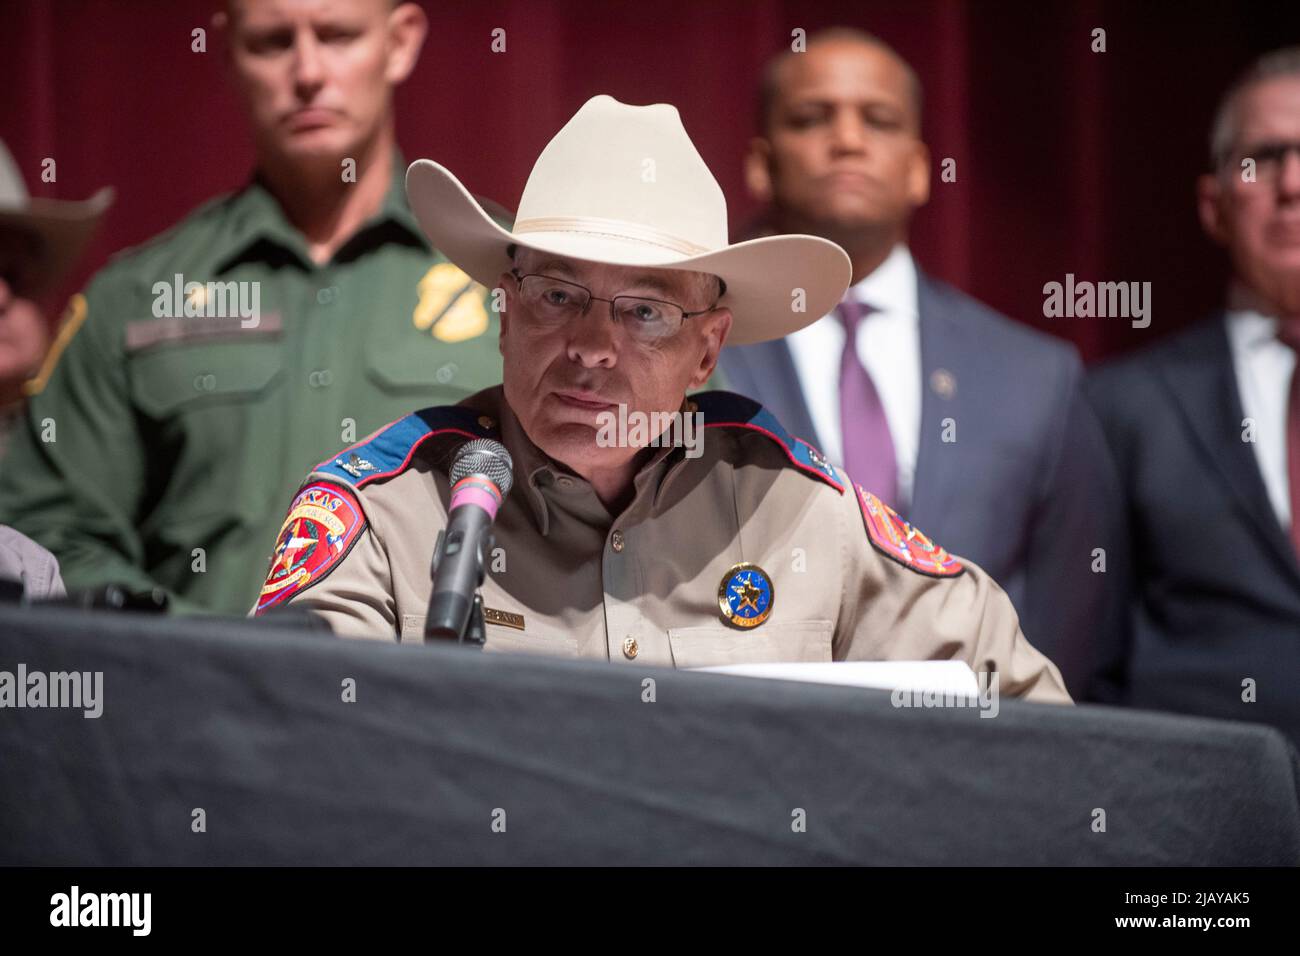 Uvalde Texas USA, May 25 2022: Texas state officials, including Texas Department of Public Safety Director STEVE MCCRAW, hold a press briefing at Uvalde High School a day after an 18-year old gunman entered Robb Elementary School and killed 19 students and two teachers. ©Bob Daemmrich Stock Photo